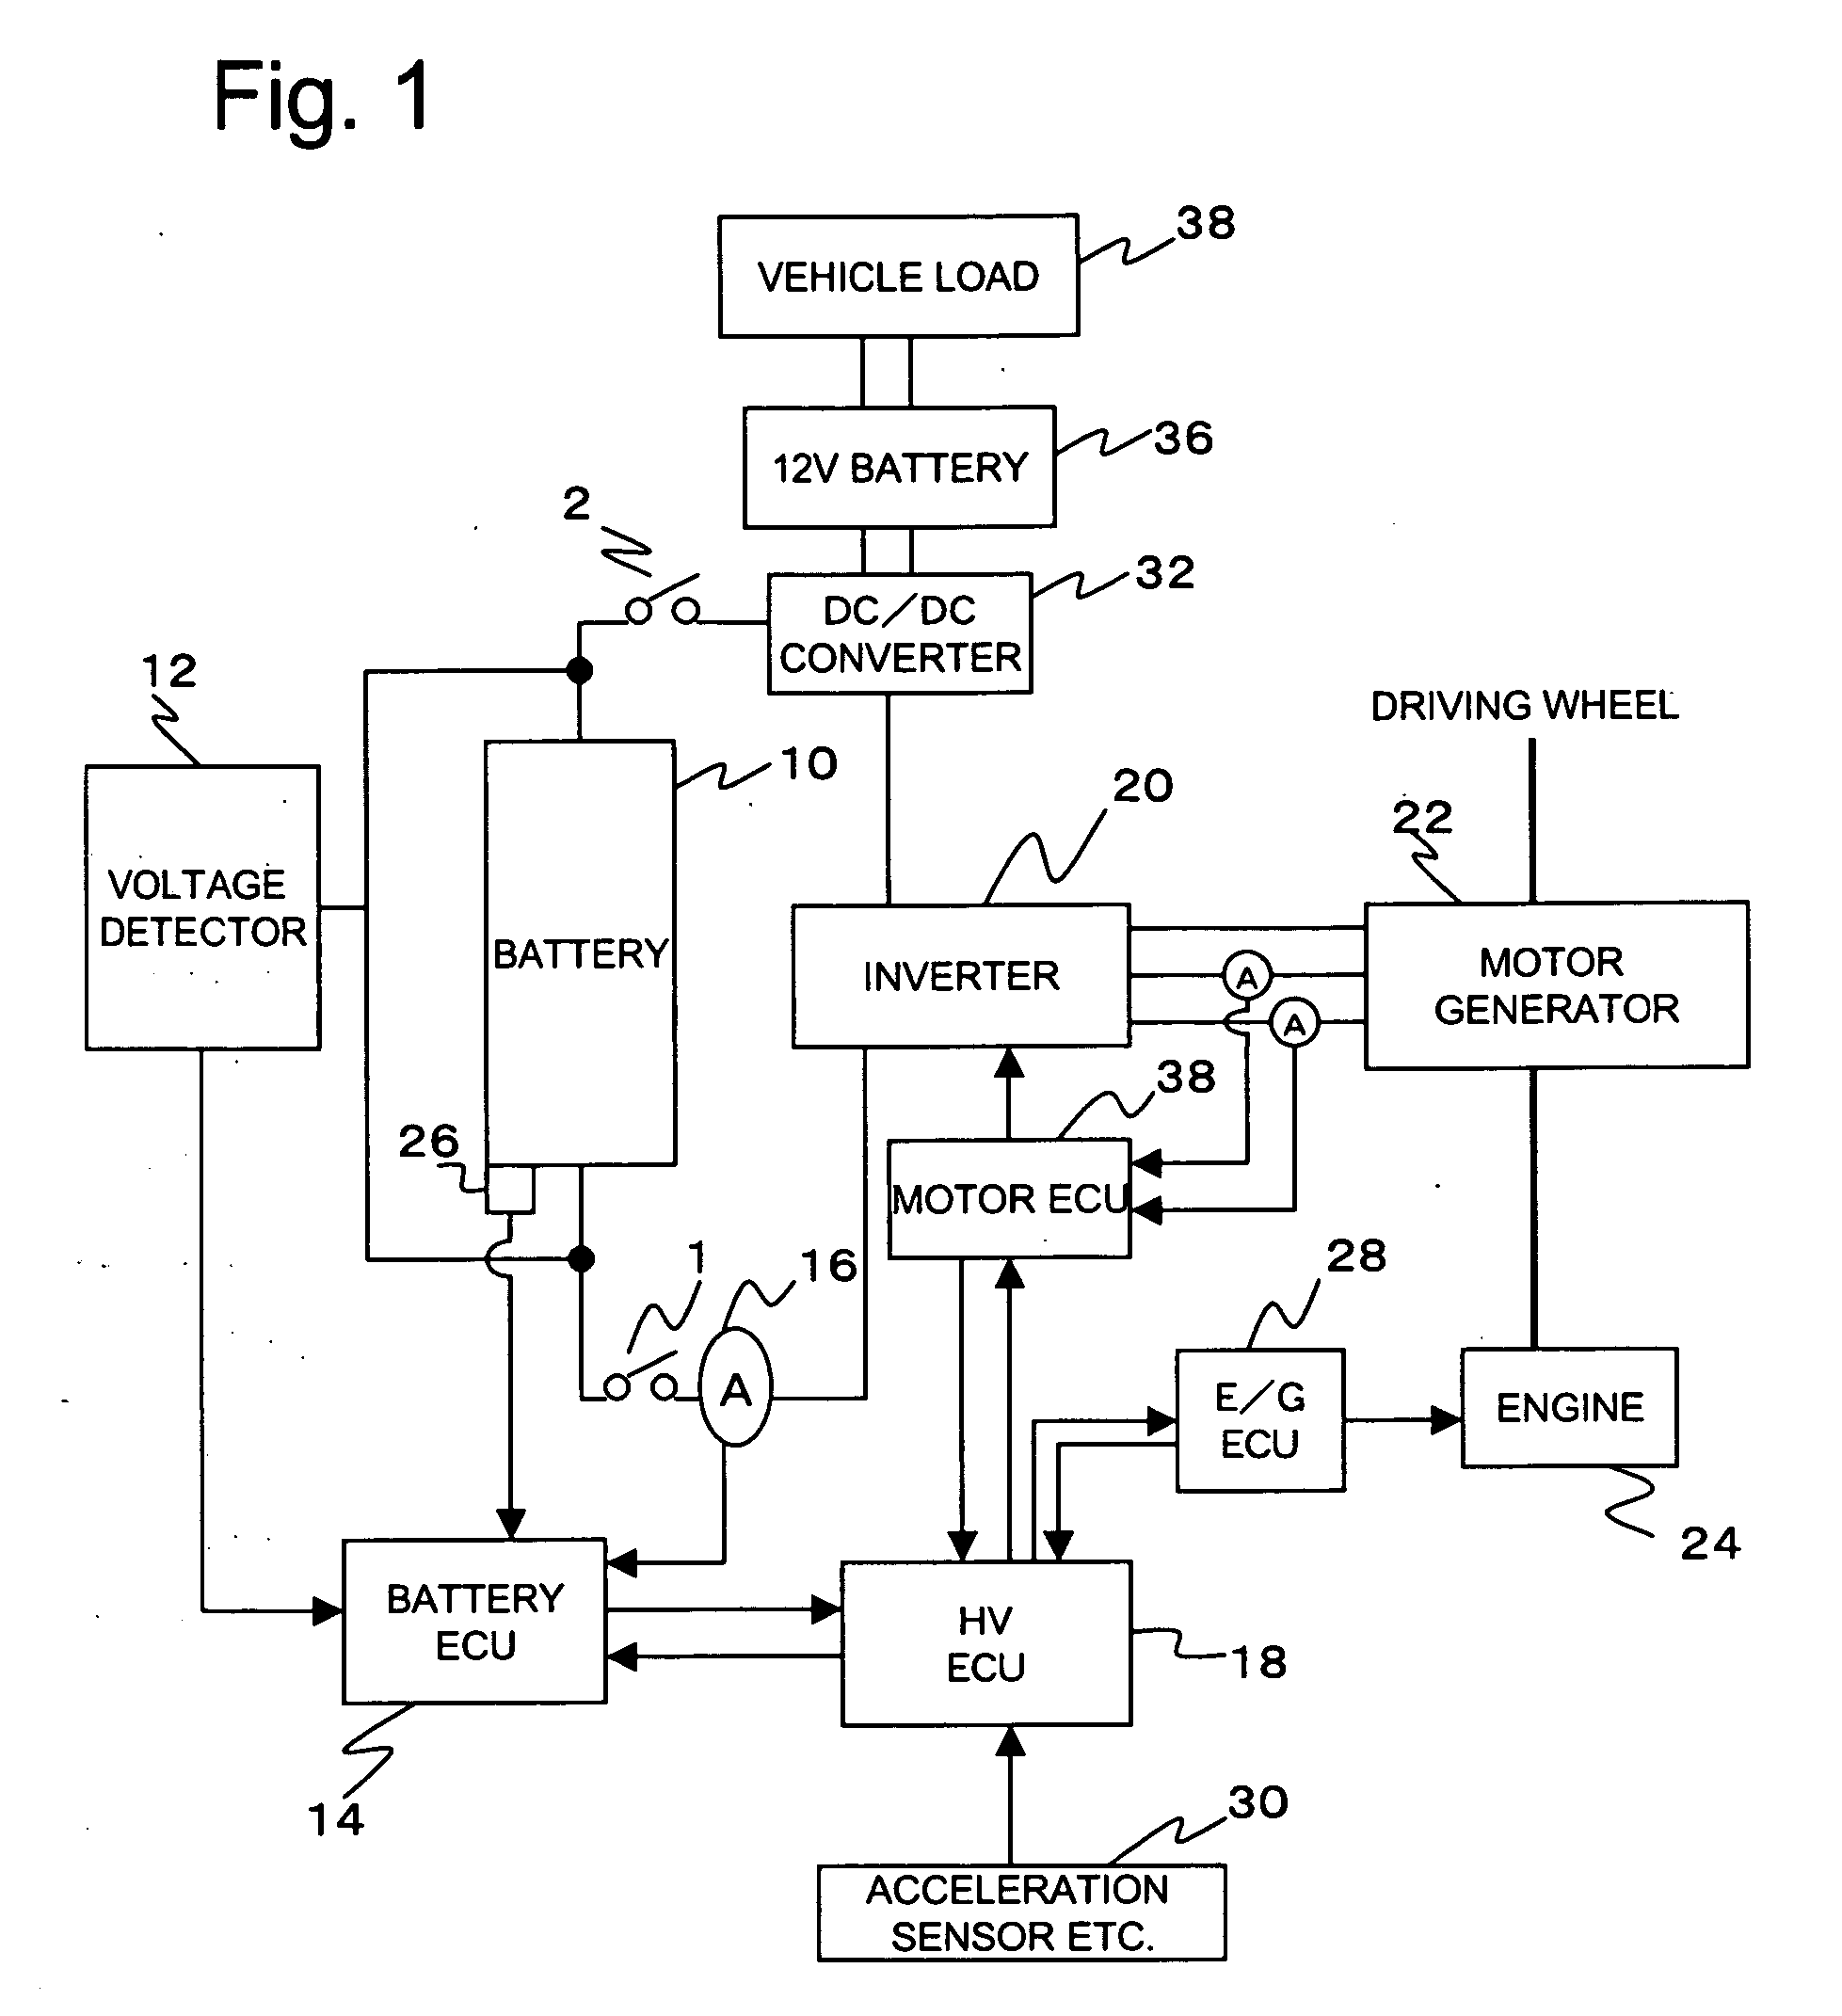 Battery state-of-charge estimator